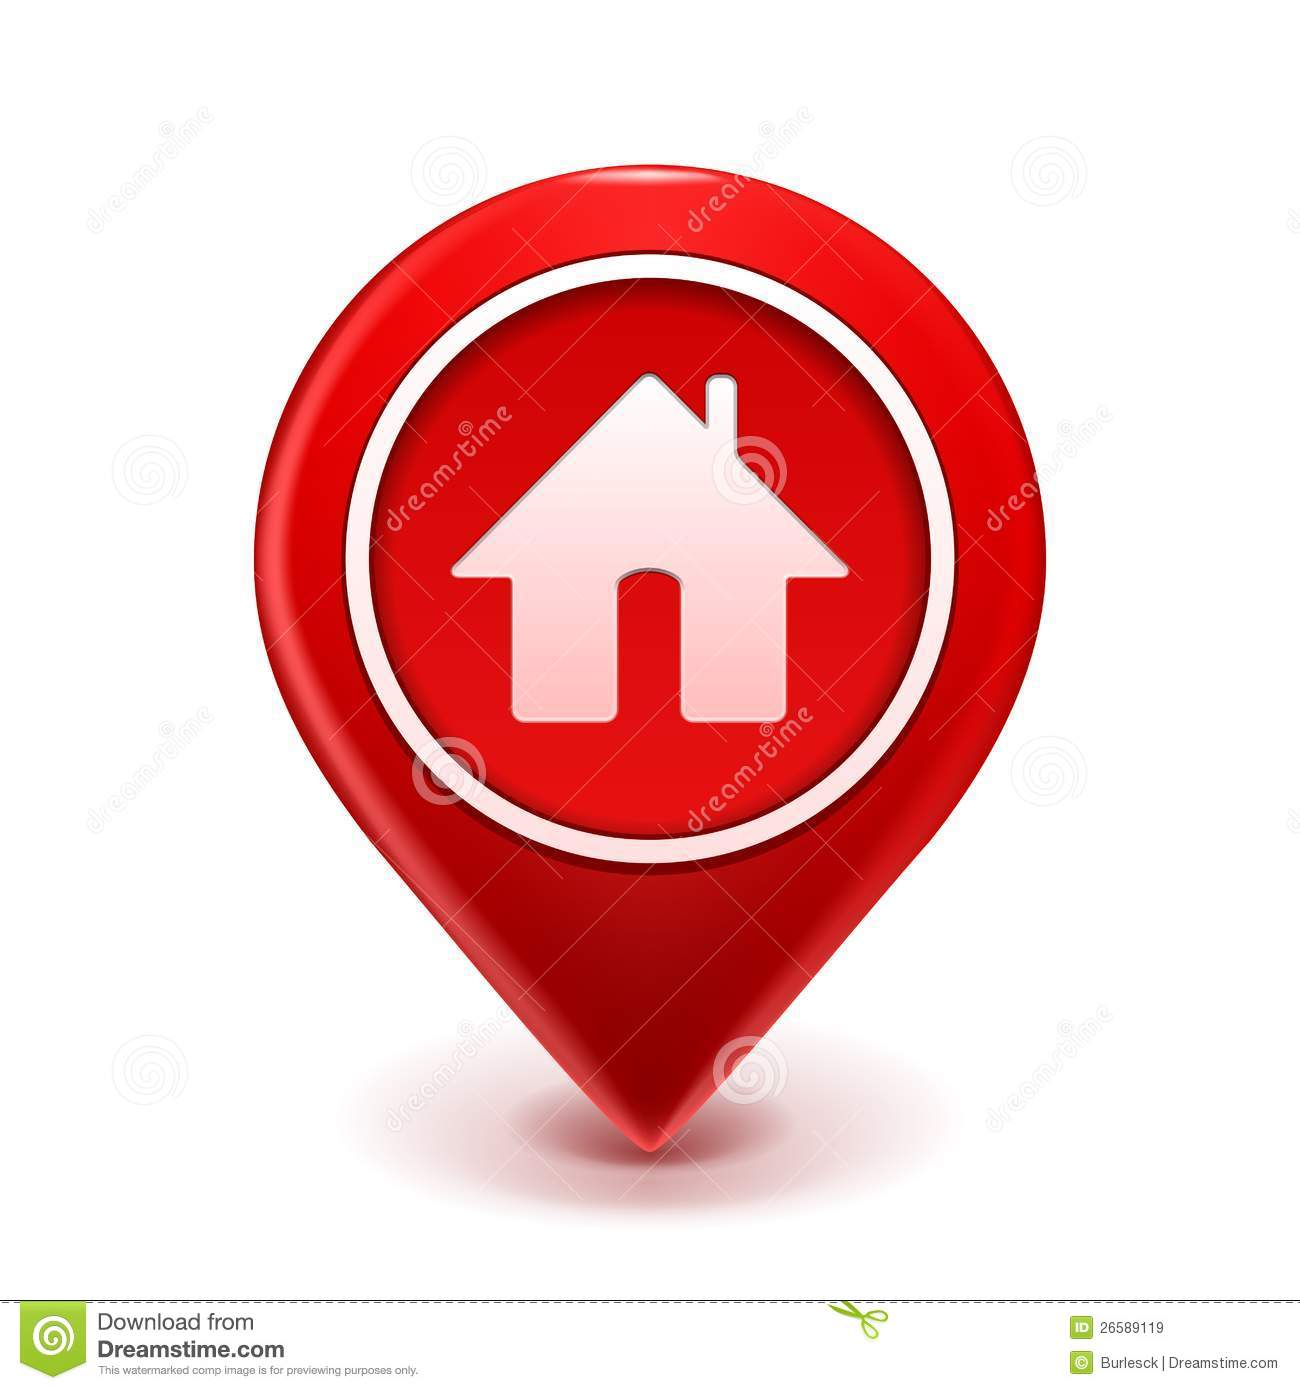 A house icon to clic on to apply for a home loan